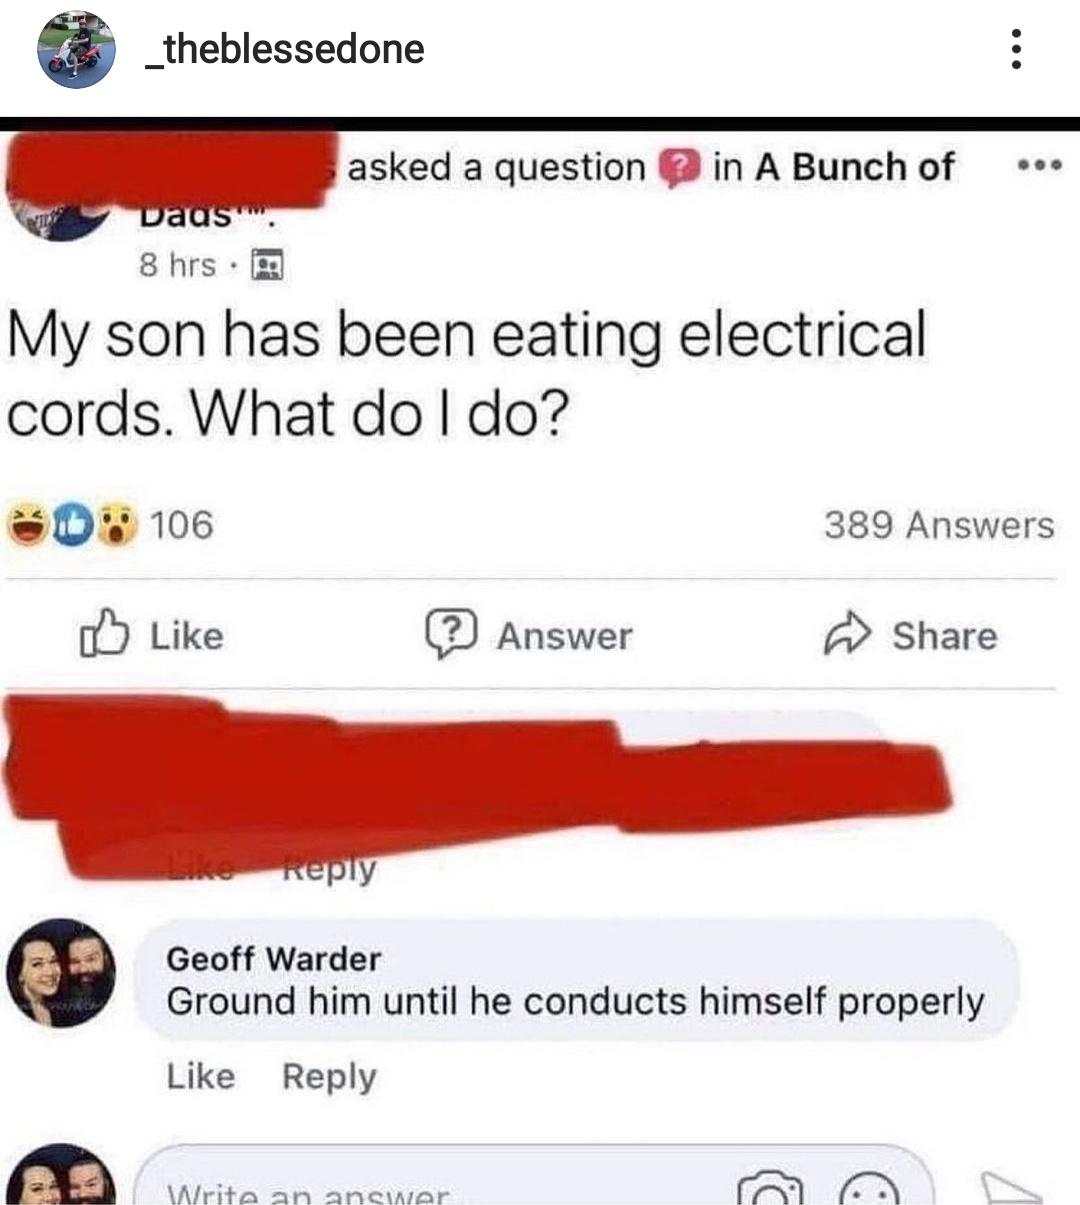 funny memes - hilarious memes - my son has been eating electrical cords - _theblessedone asked a question in A Bunch of vaus. 8 hrs. My son has been eating electrical cords. What do I do? 3D 106 389 Answers ? Answer L. Geoff Warder Ground him until he con